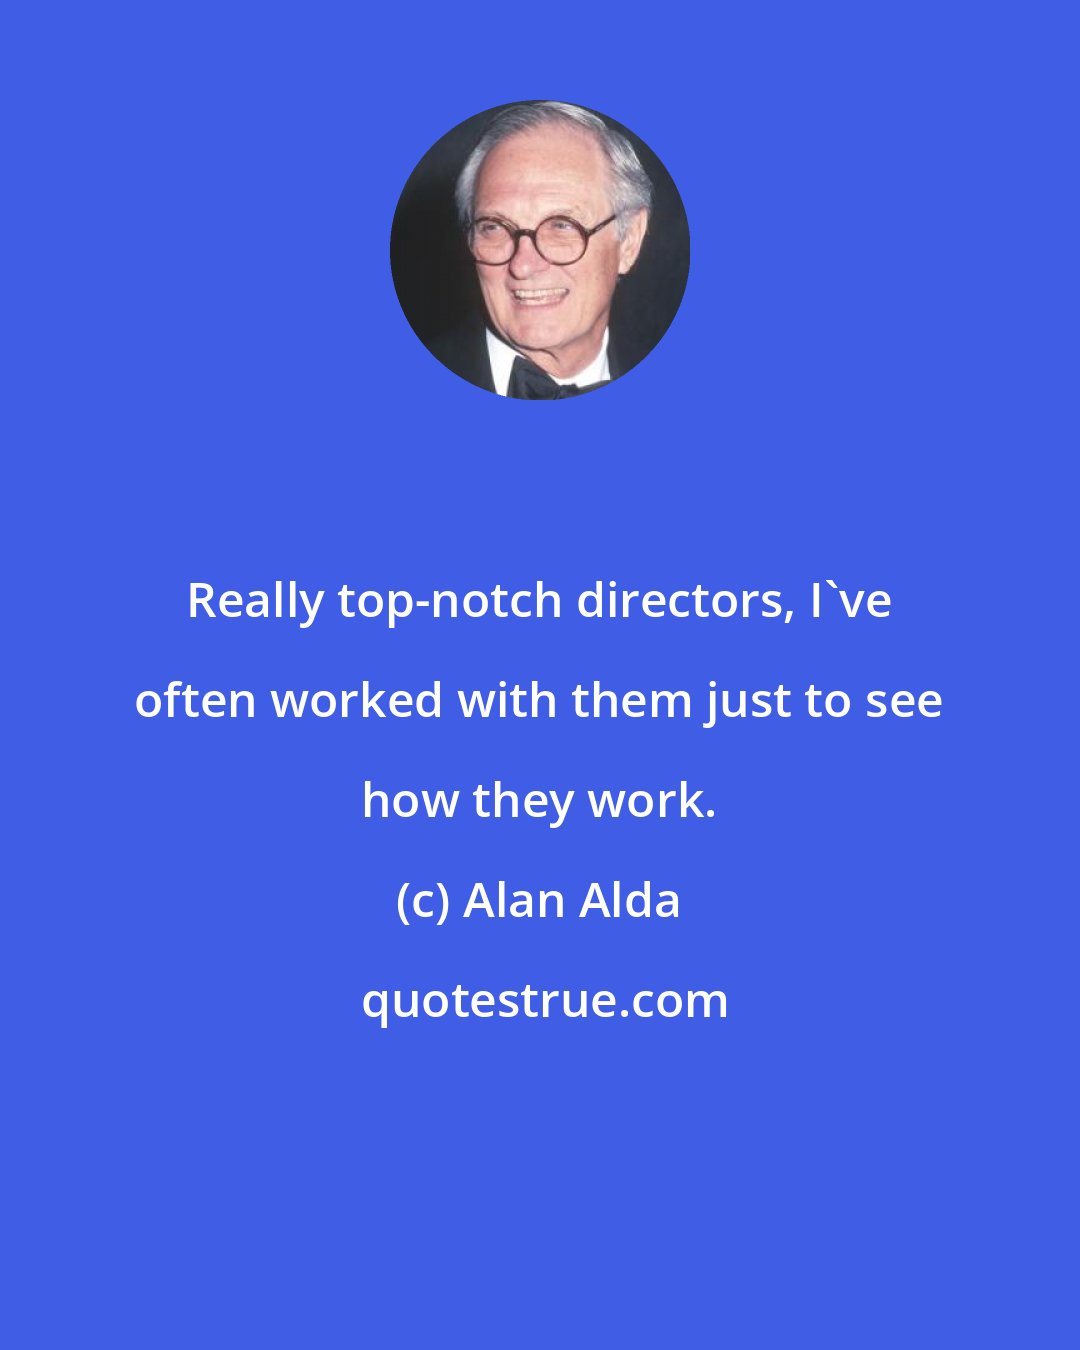 Alan Alda: Really top-notch directors, I've often worked with them just to see how they work.